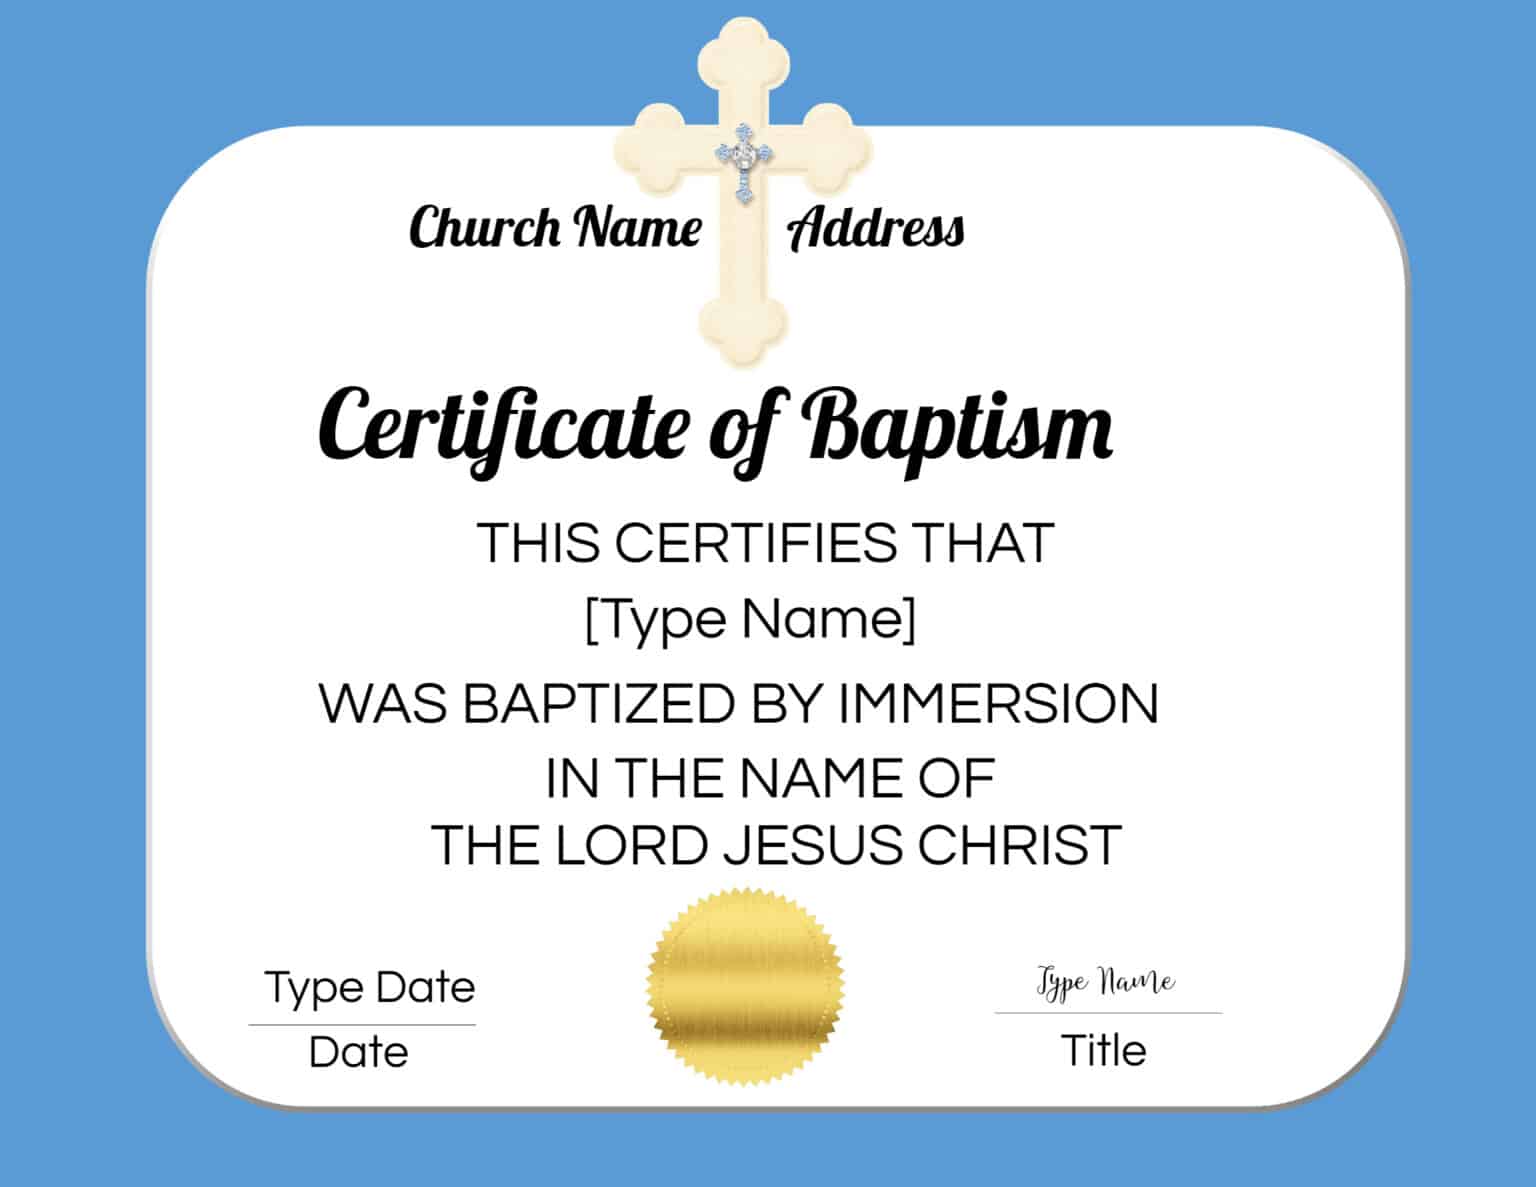 FREE Baptism Certificate Templates | Customize Online | No Watermark